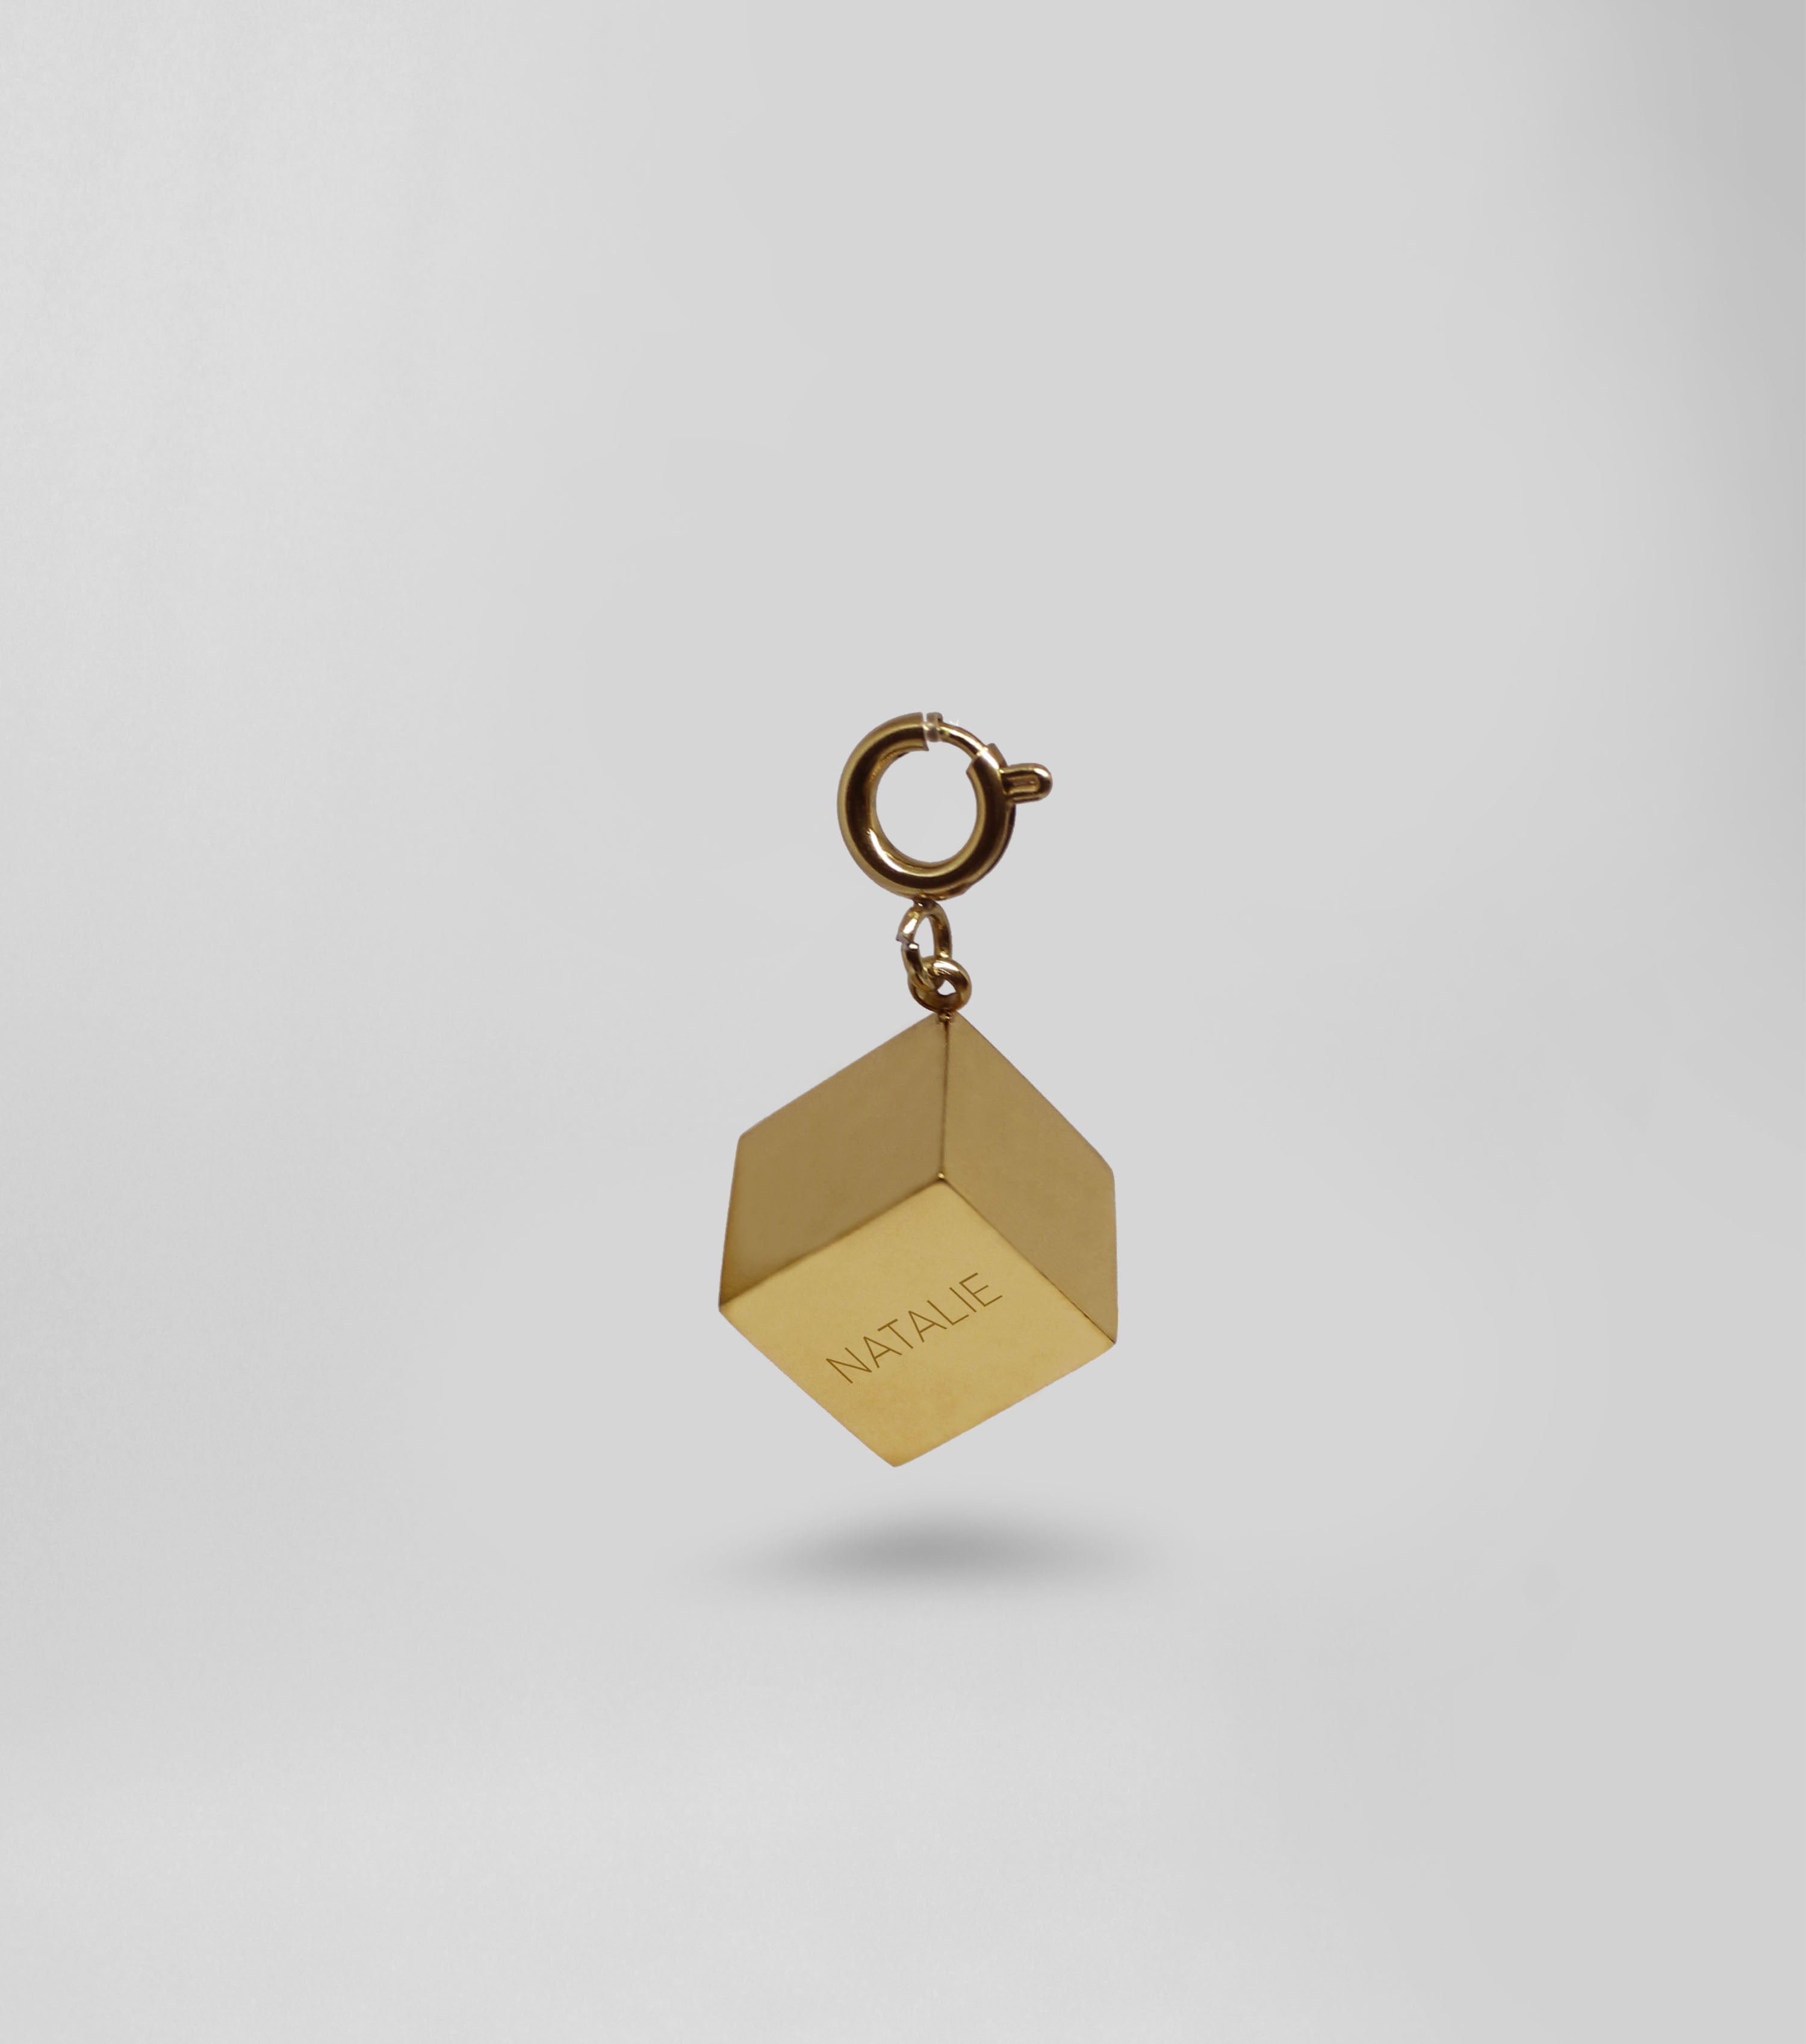 Fearless Horseshoe Chain Necklace + Square Cube Pendant